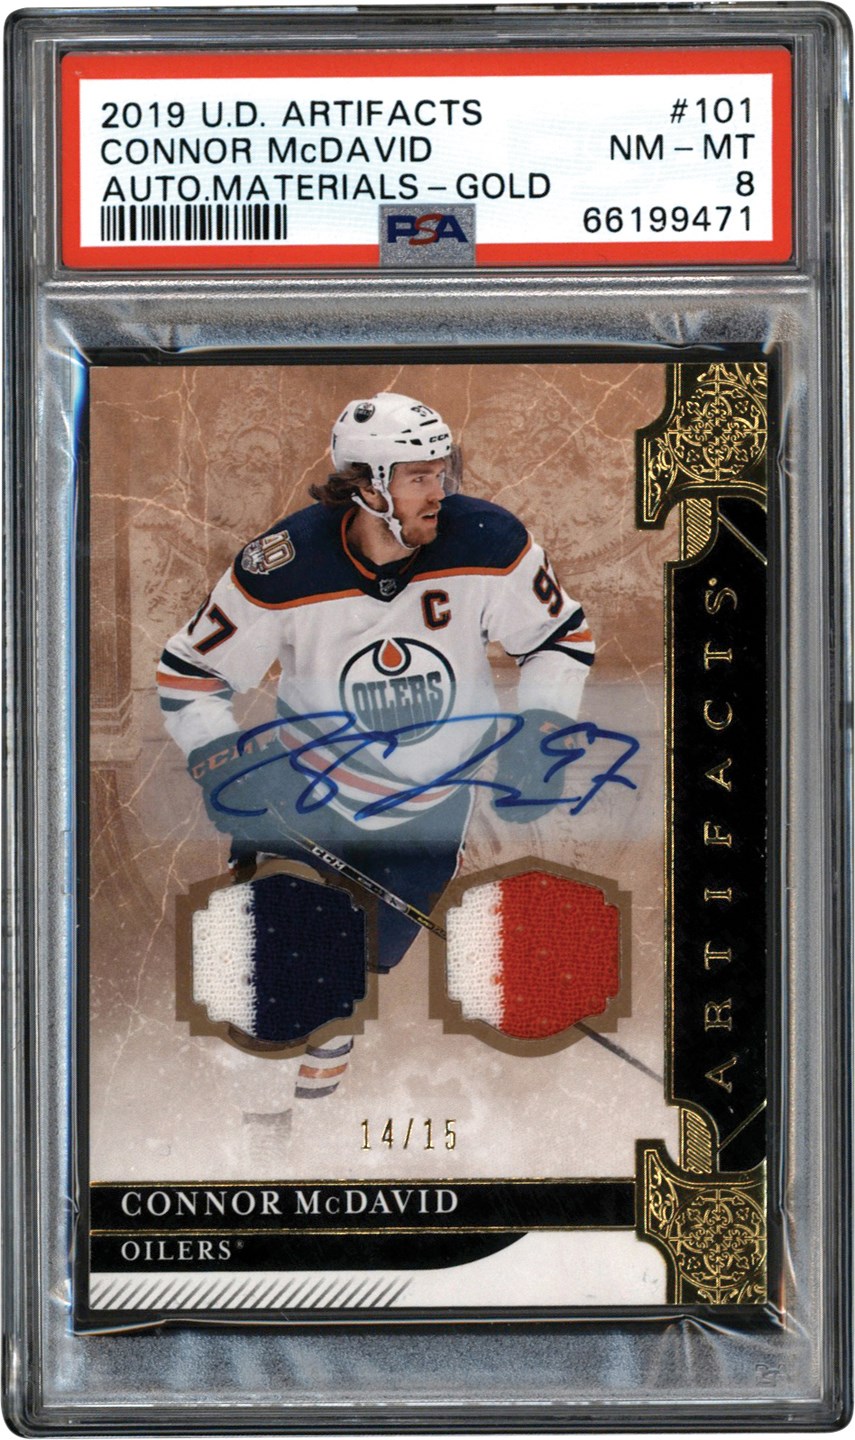 - 2019-2020 Upper Deck Artifacts Auto Materials Gold #101 Connor McDavid Dual Game Used Patch Autograph #14/15 PSA NM-MT 8 (Pop 1 of 1 Highest Graded)